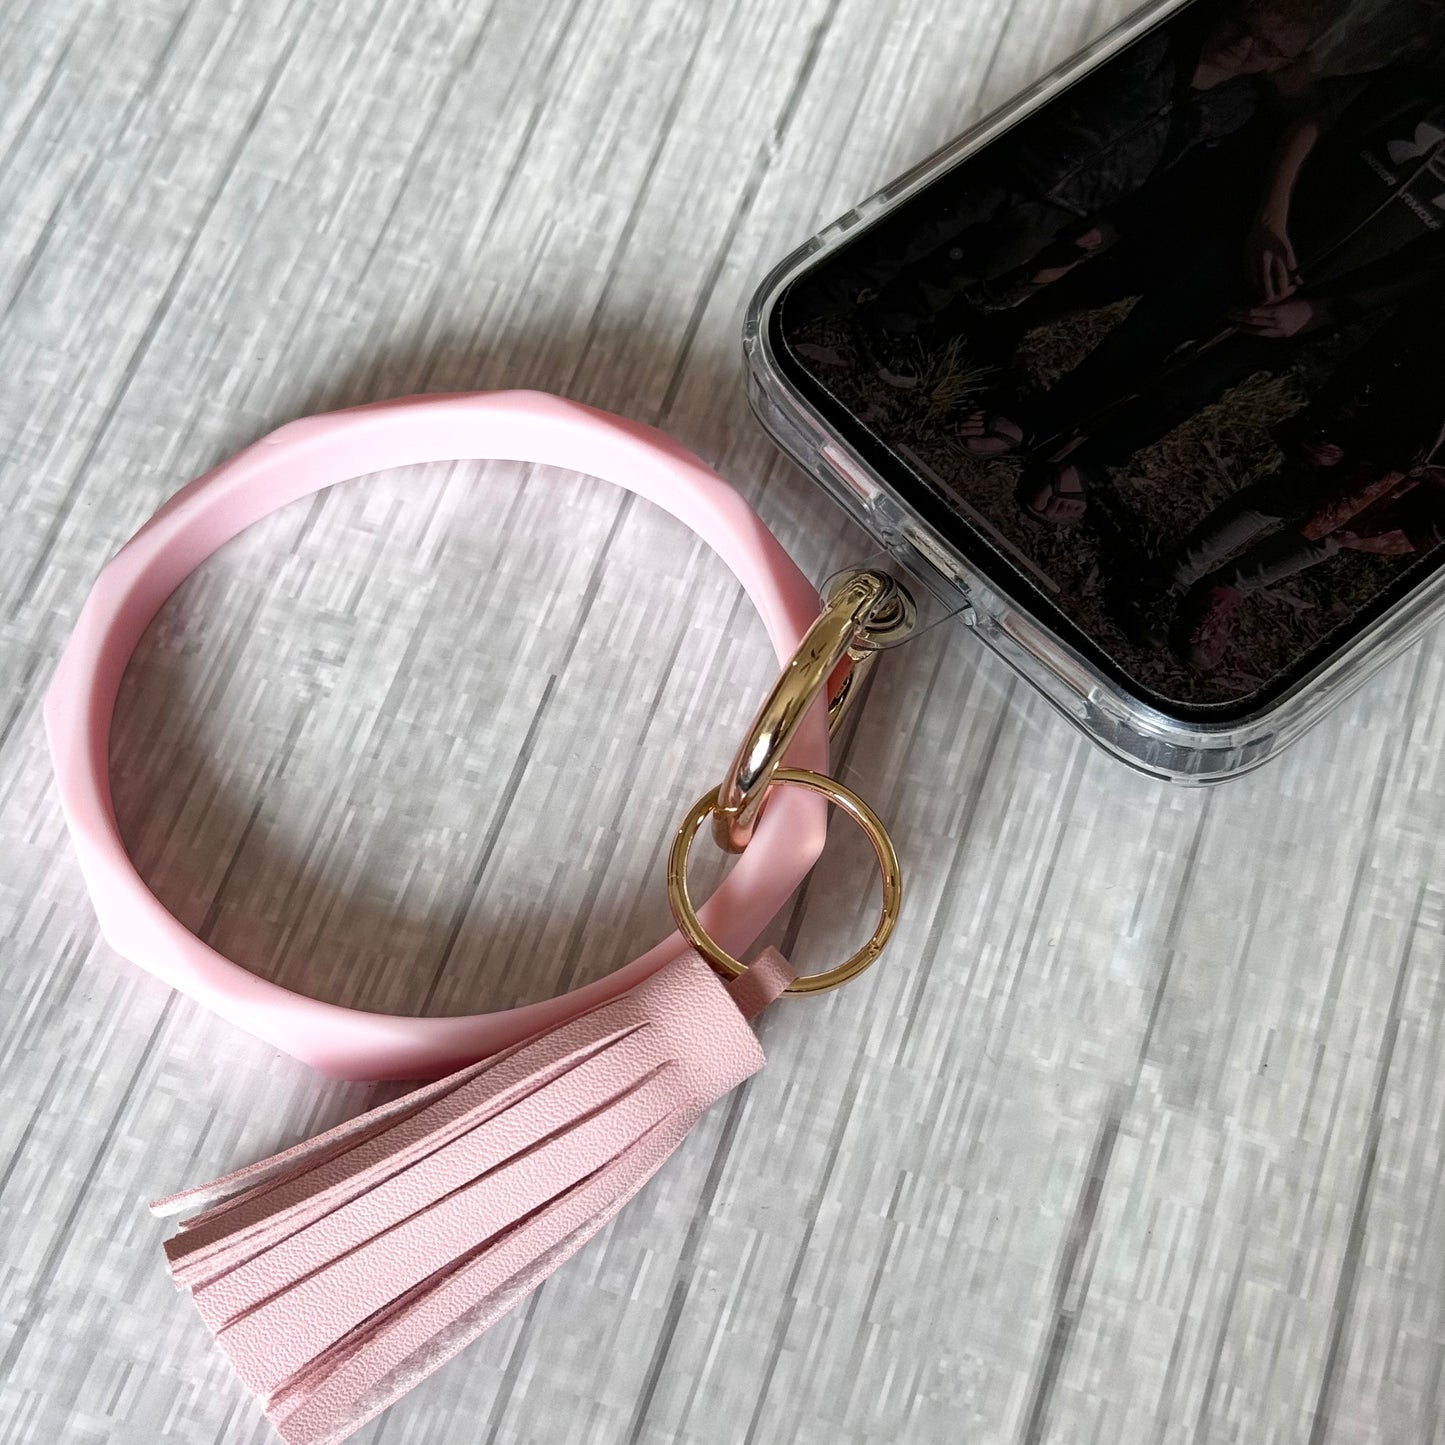 Phone Bracelet Keychain with Tether Tab - CORAL